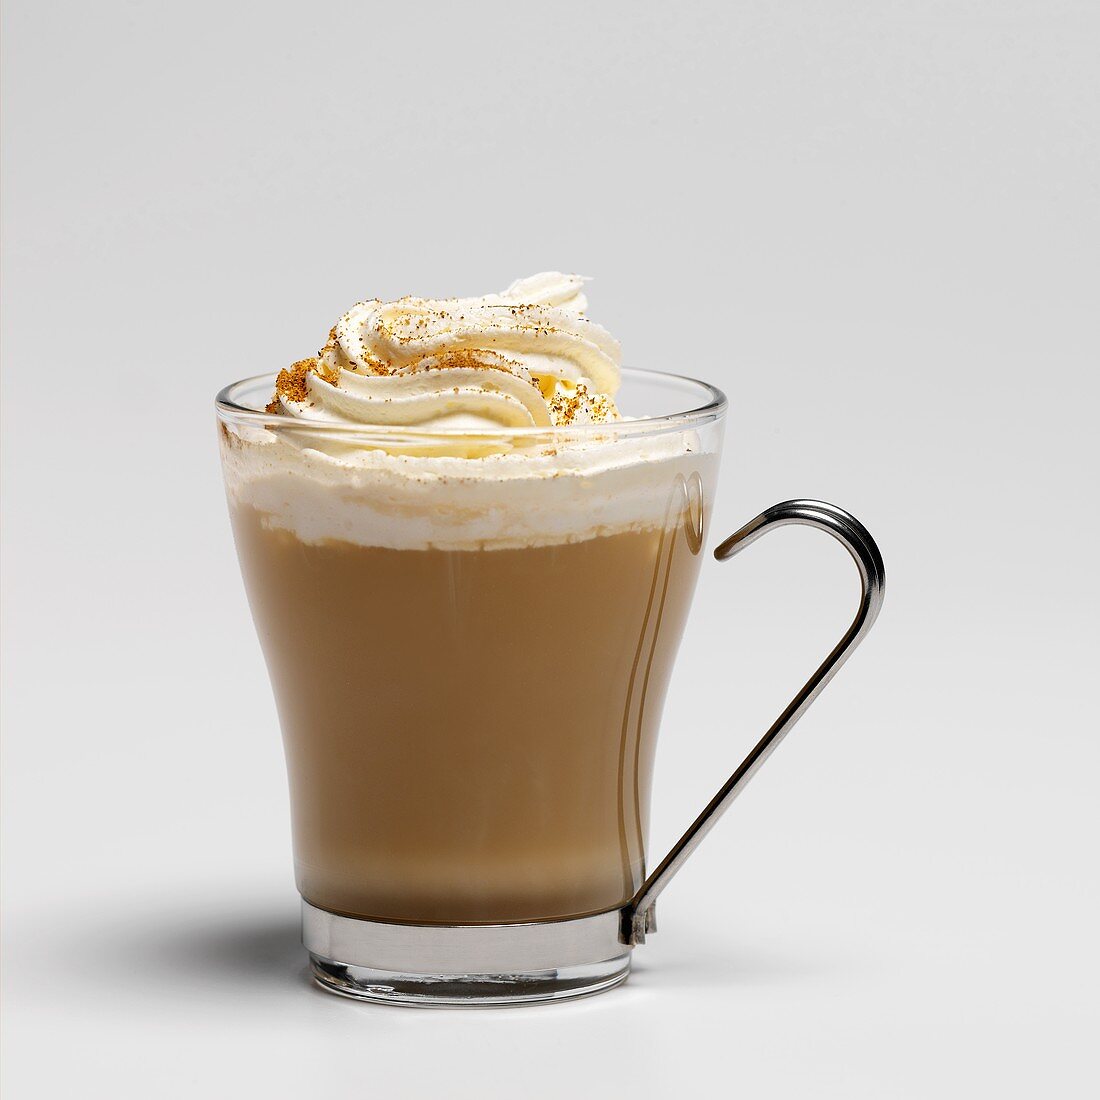 Pumpkin coffee (coffee with cream topping and nutmeg)